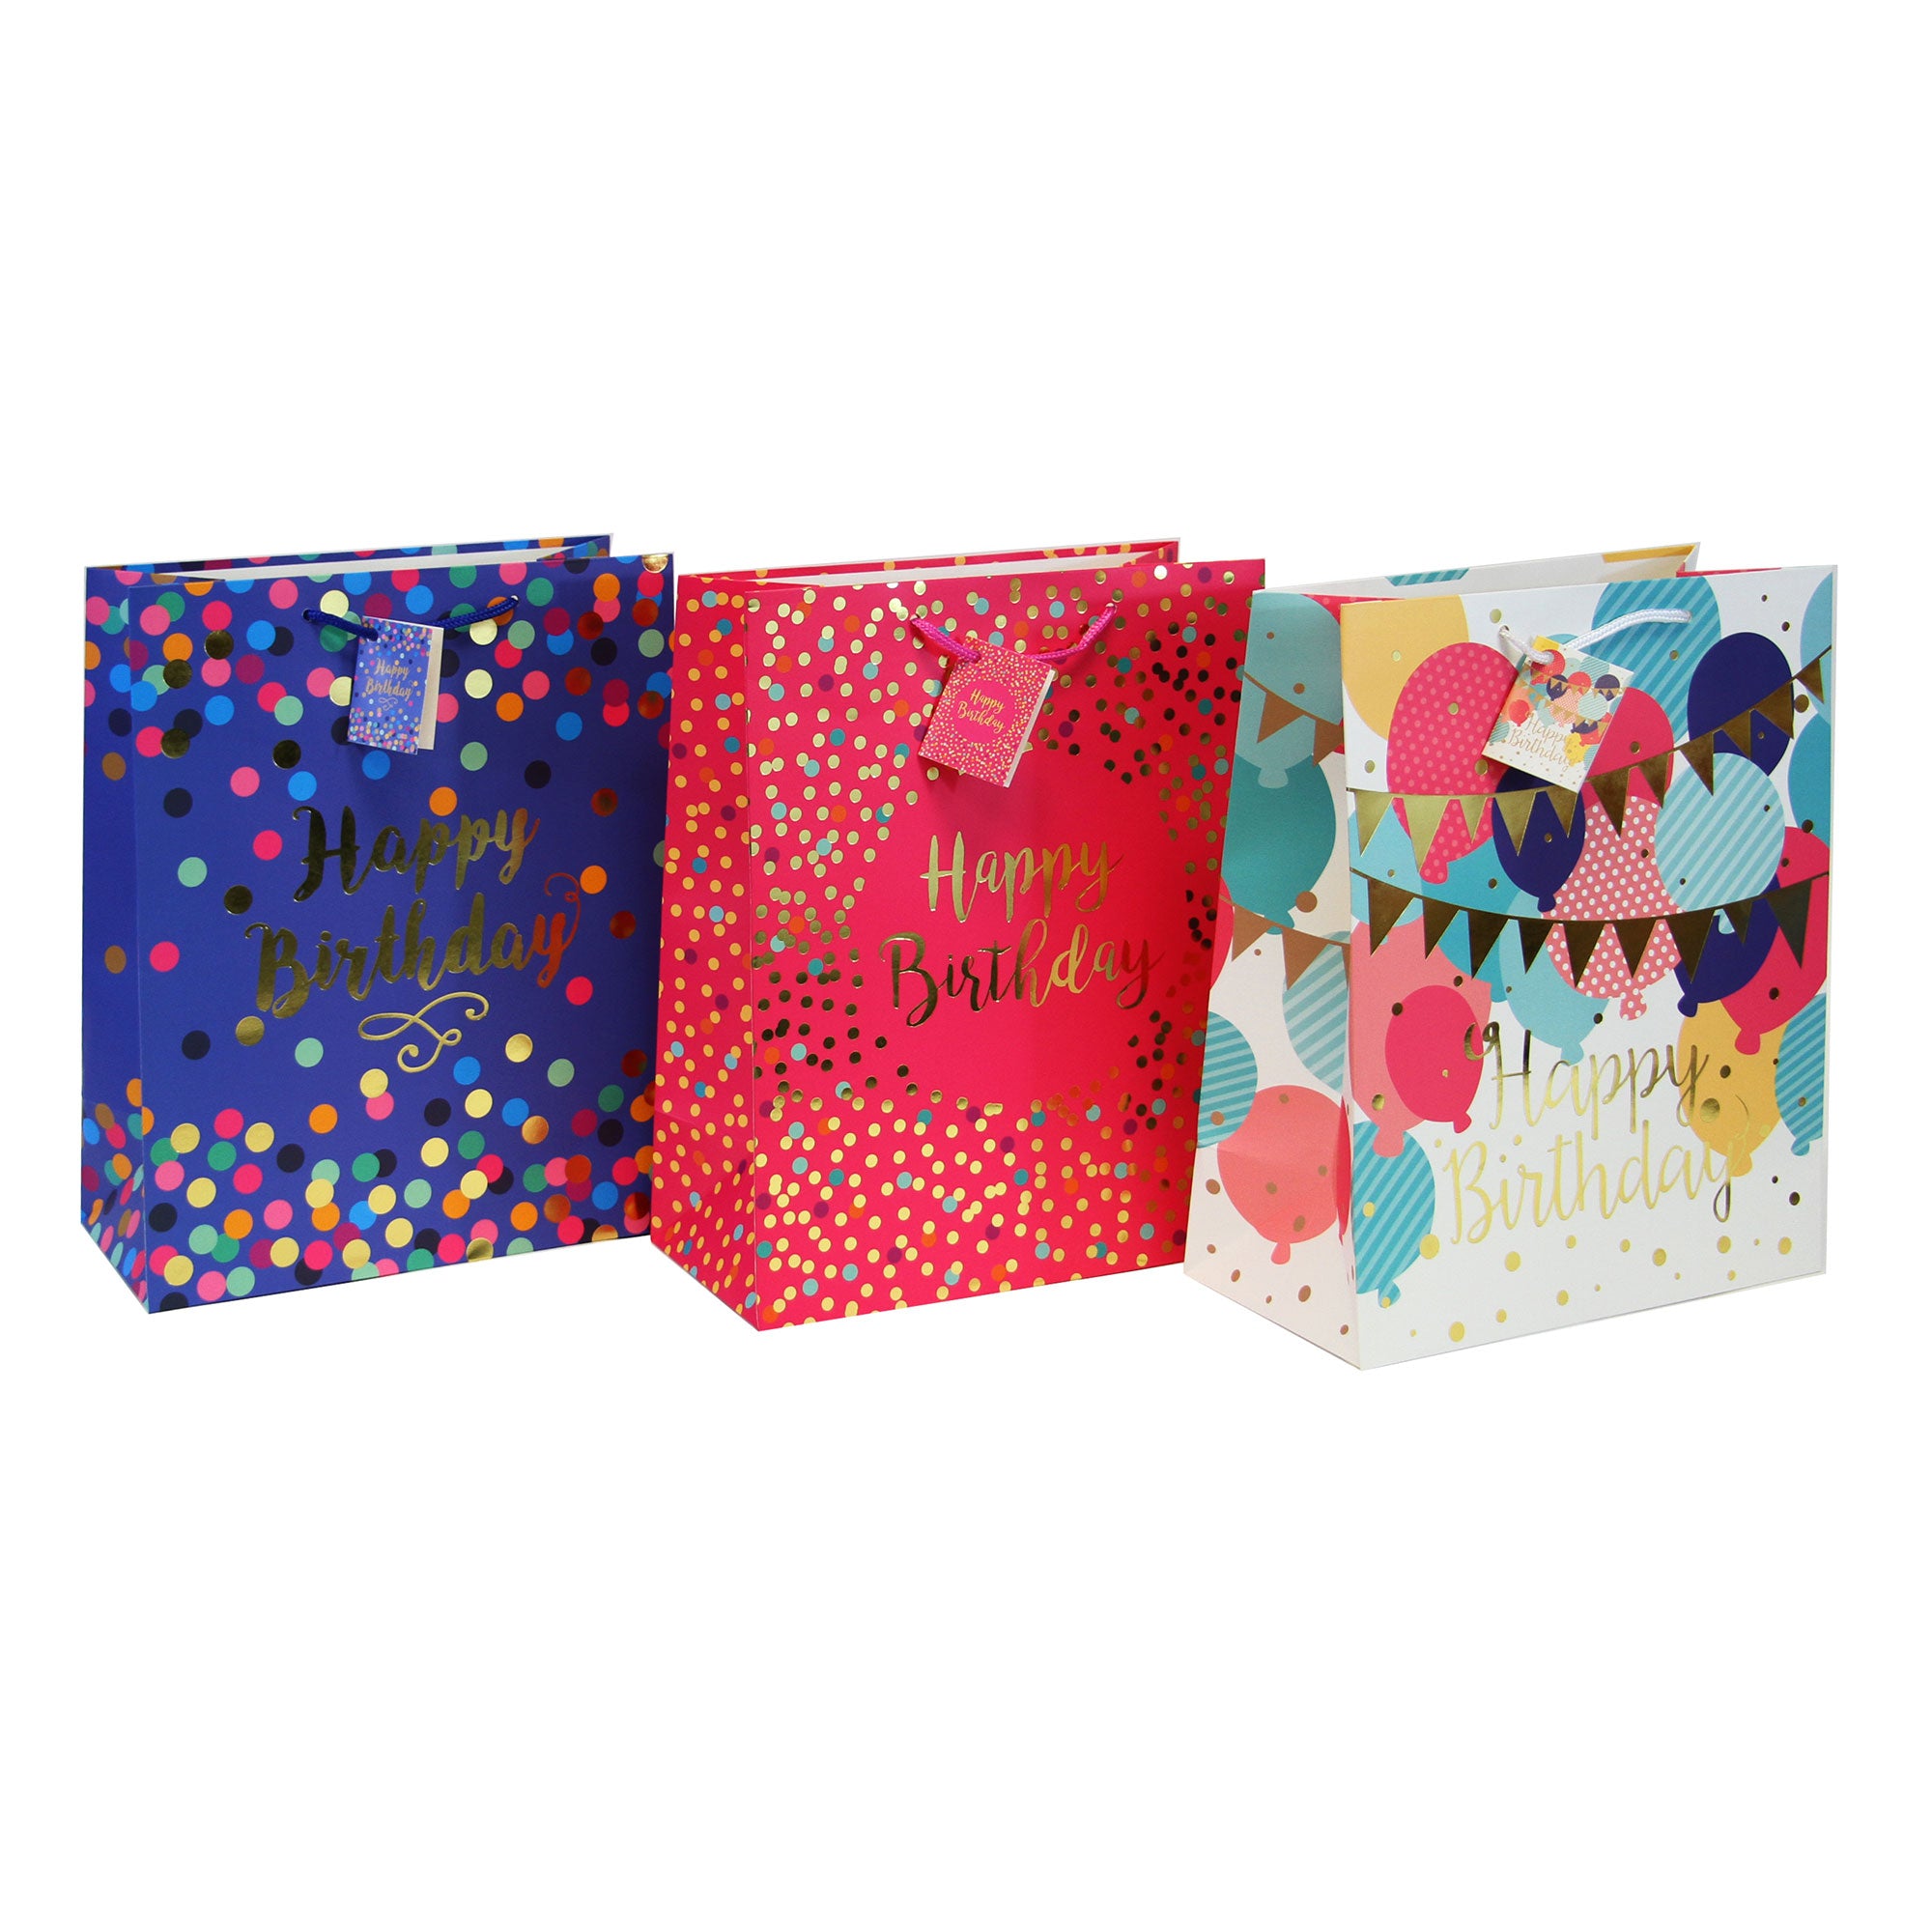 SURPRISE! LARGE BIRTHDAY GIFT BAGS